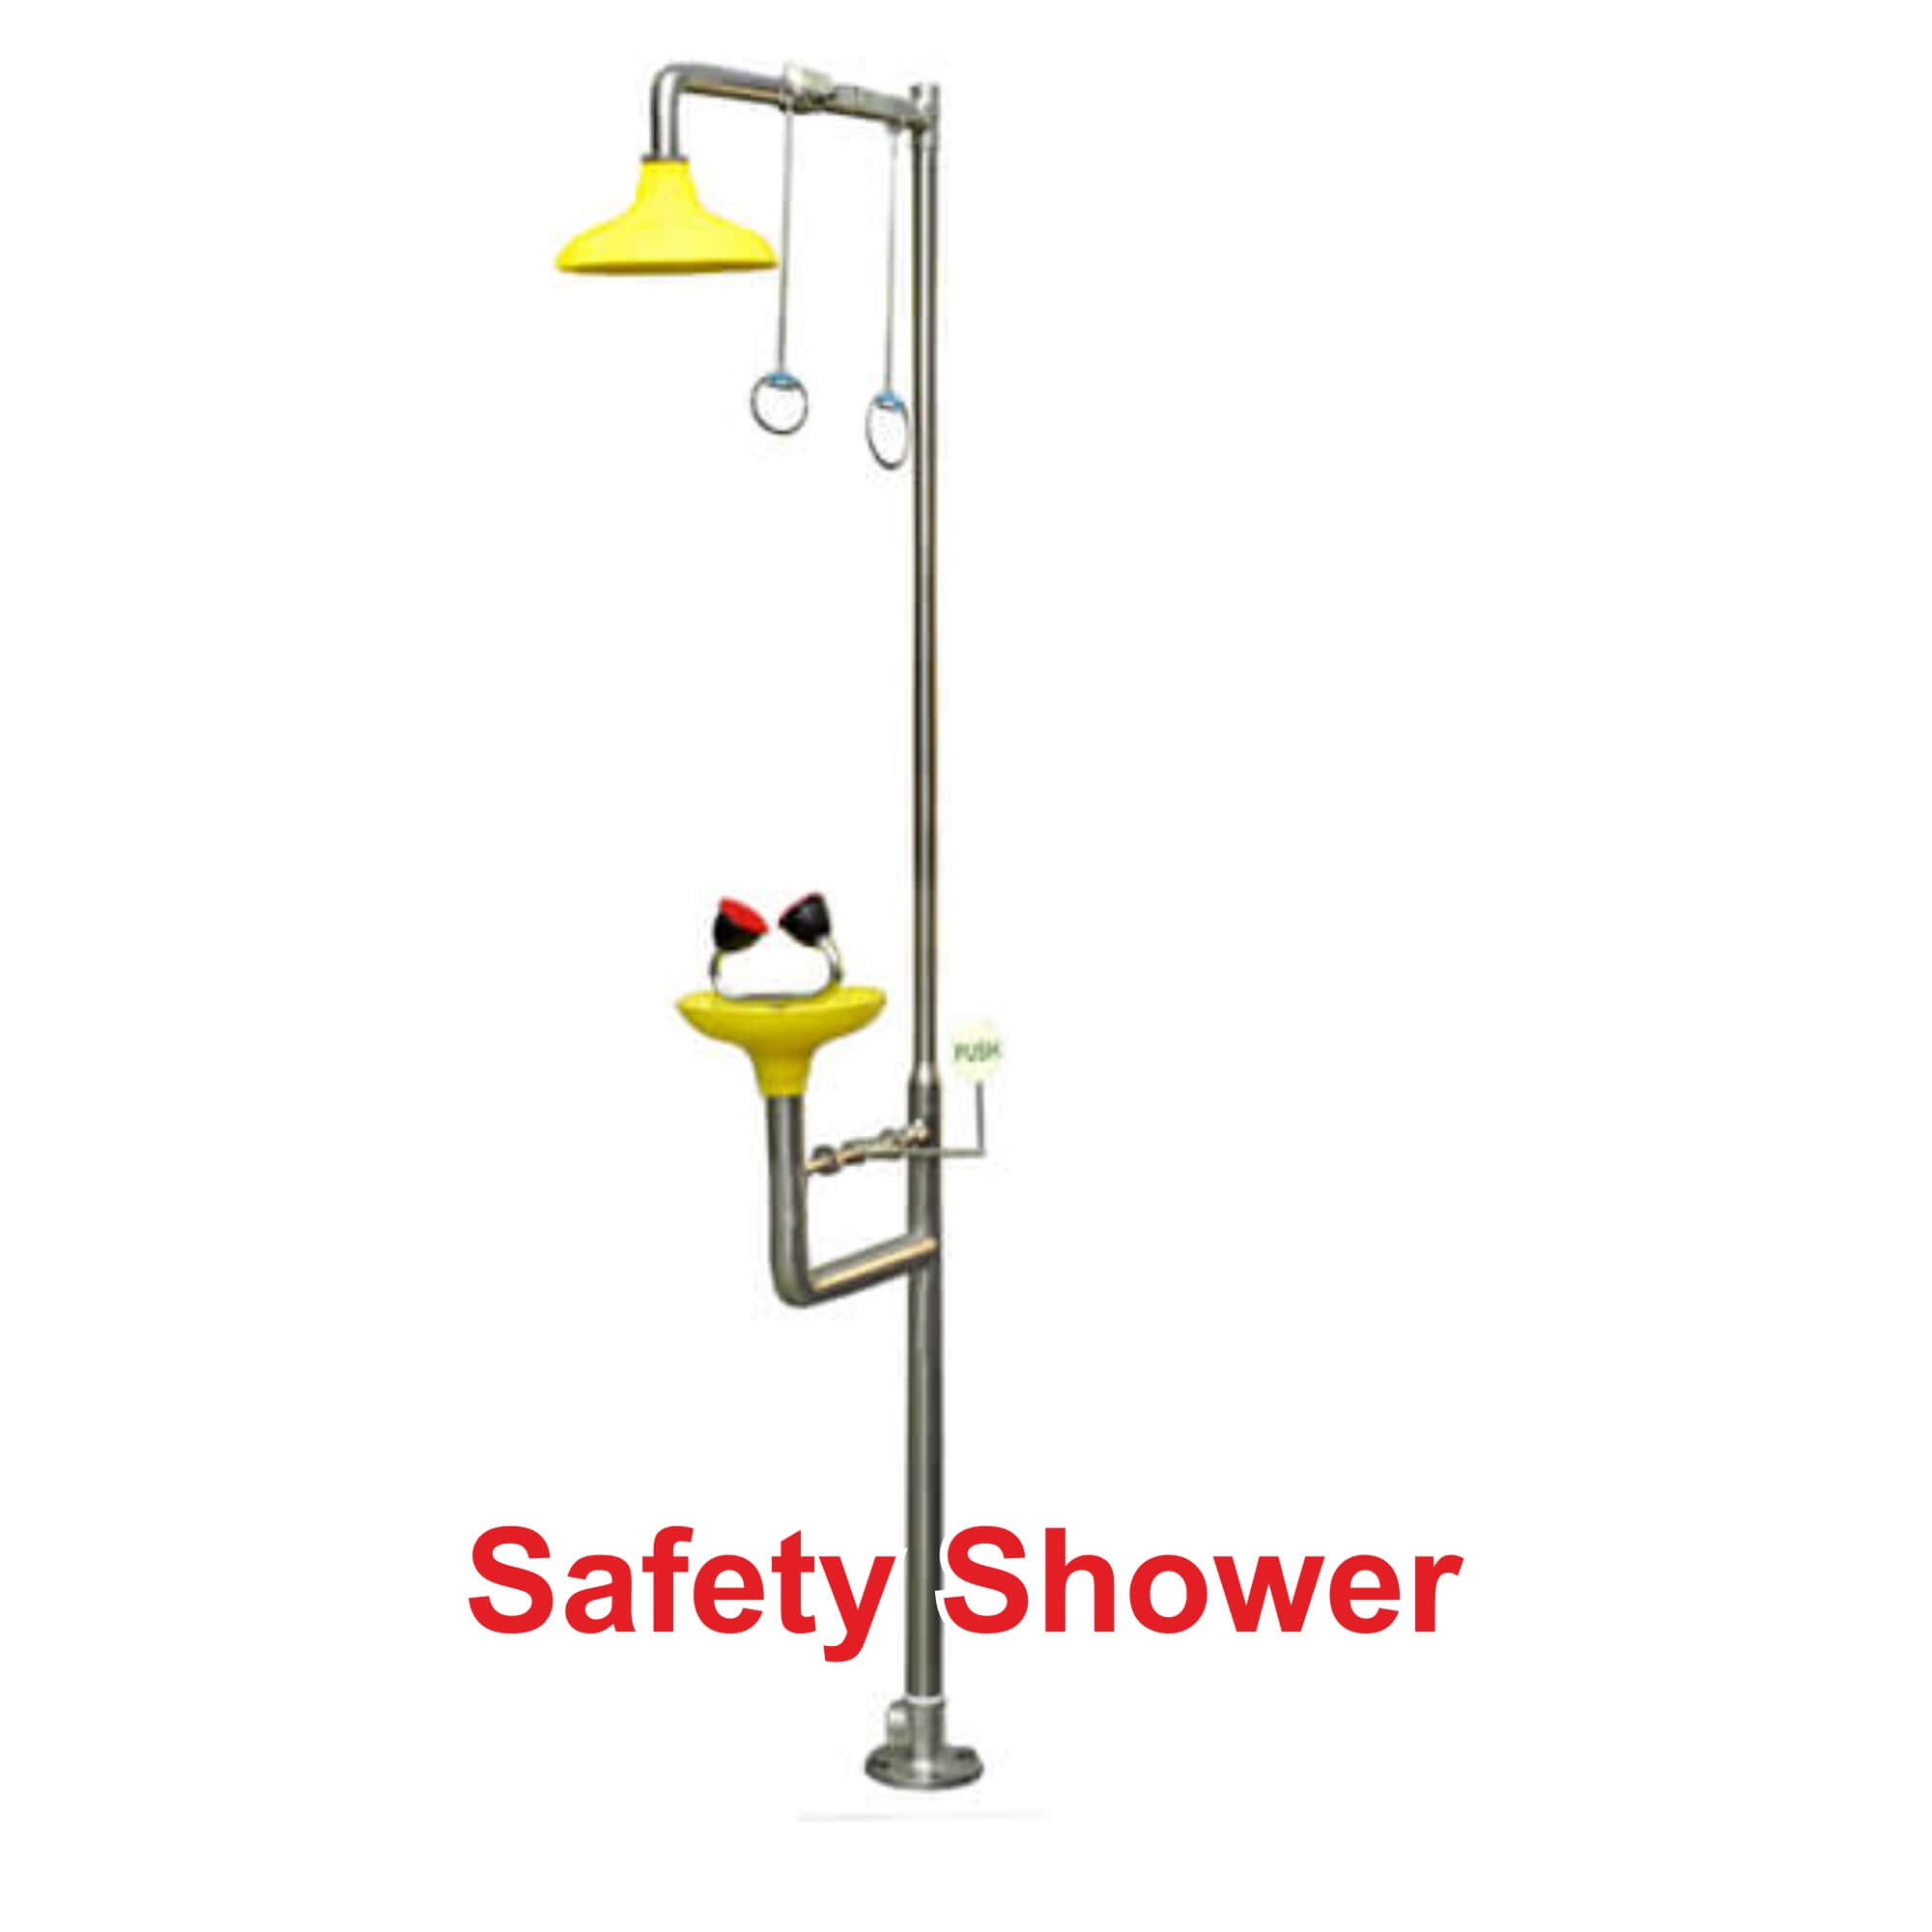 Safety Shower Manufacturer in India